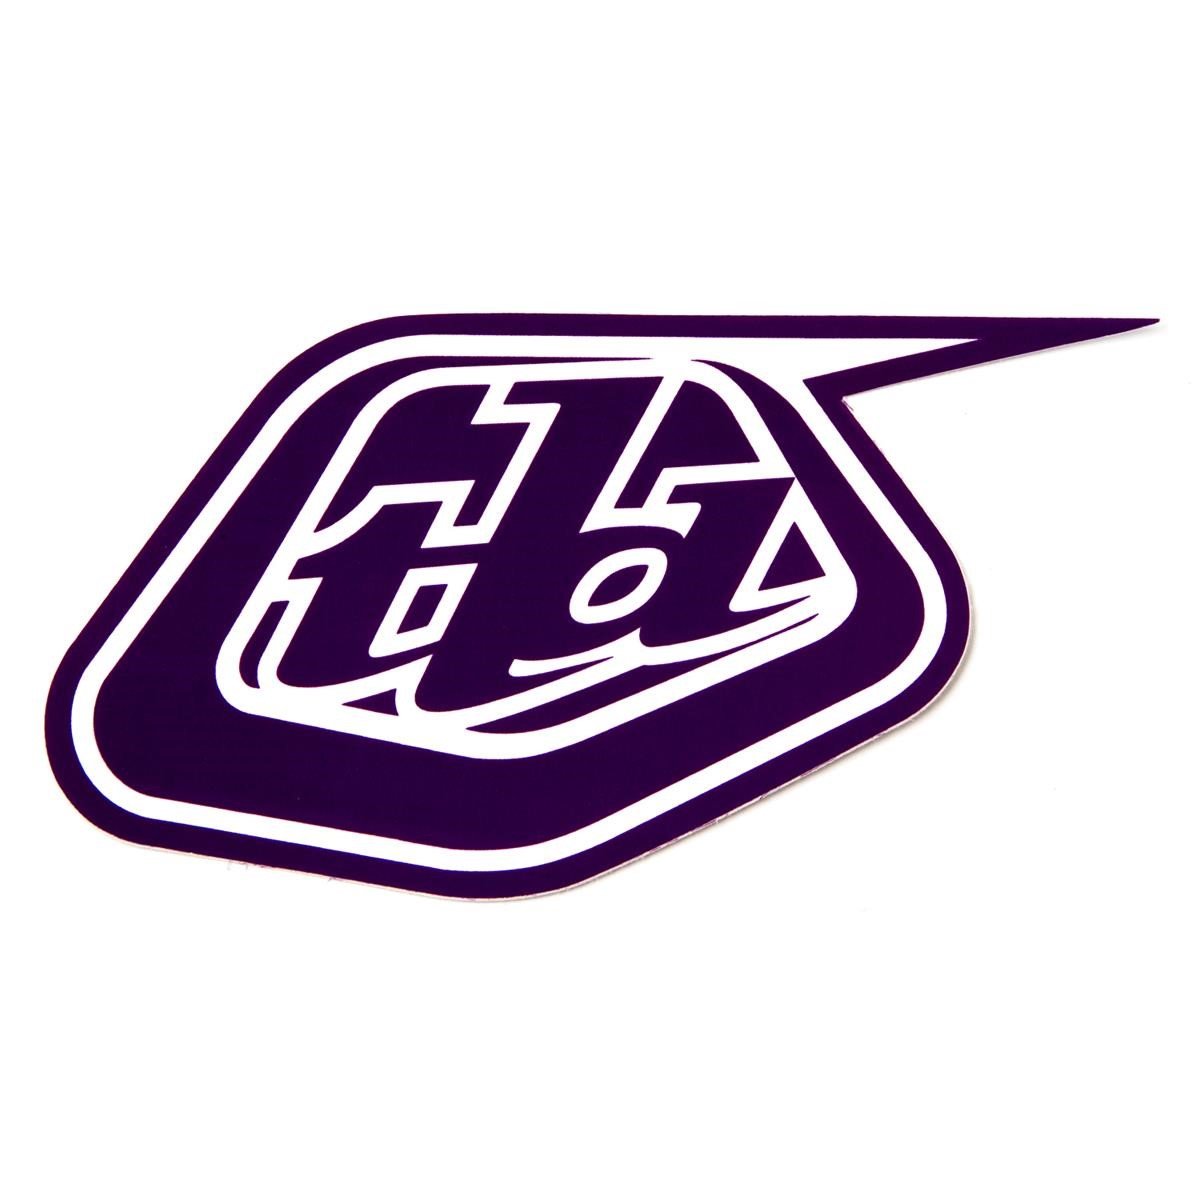 Troy Lee Designs Sticker Shield Violet - 6 inches